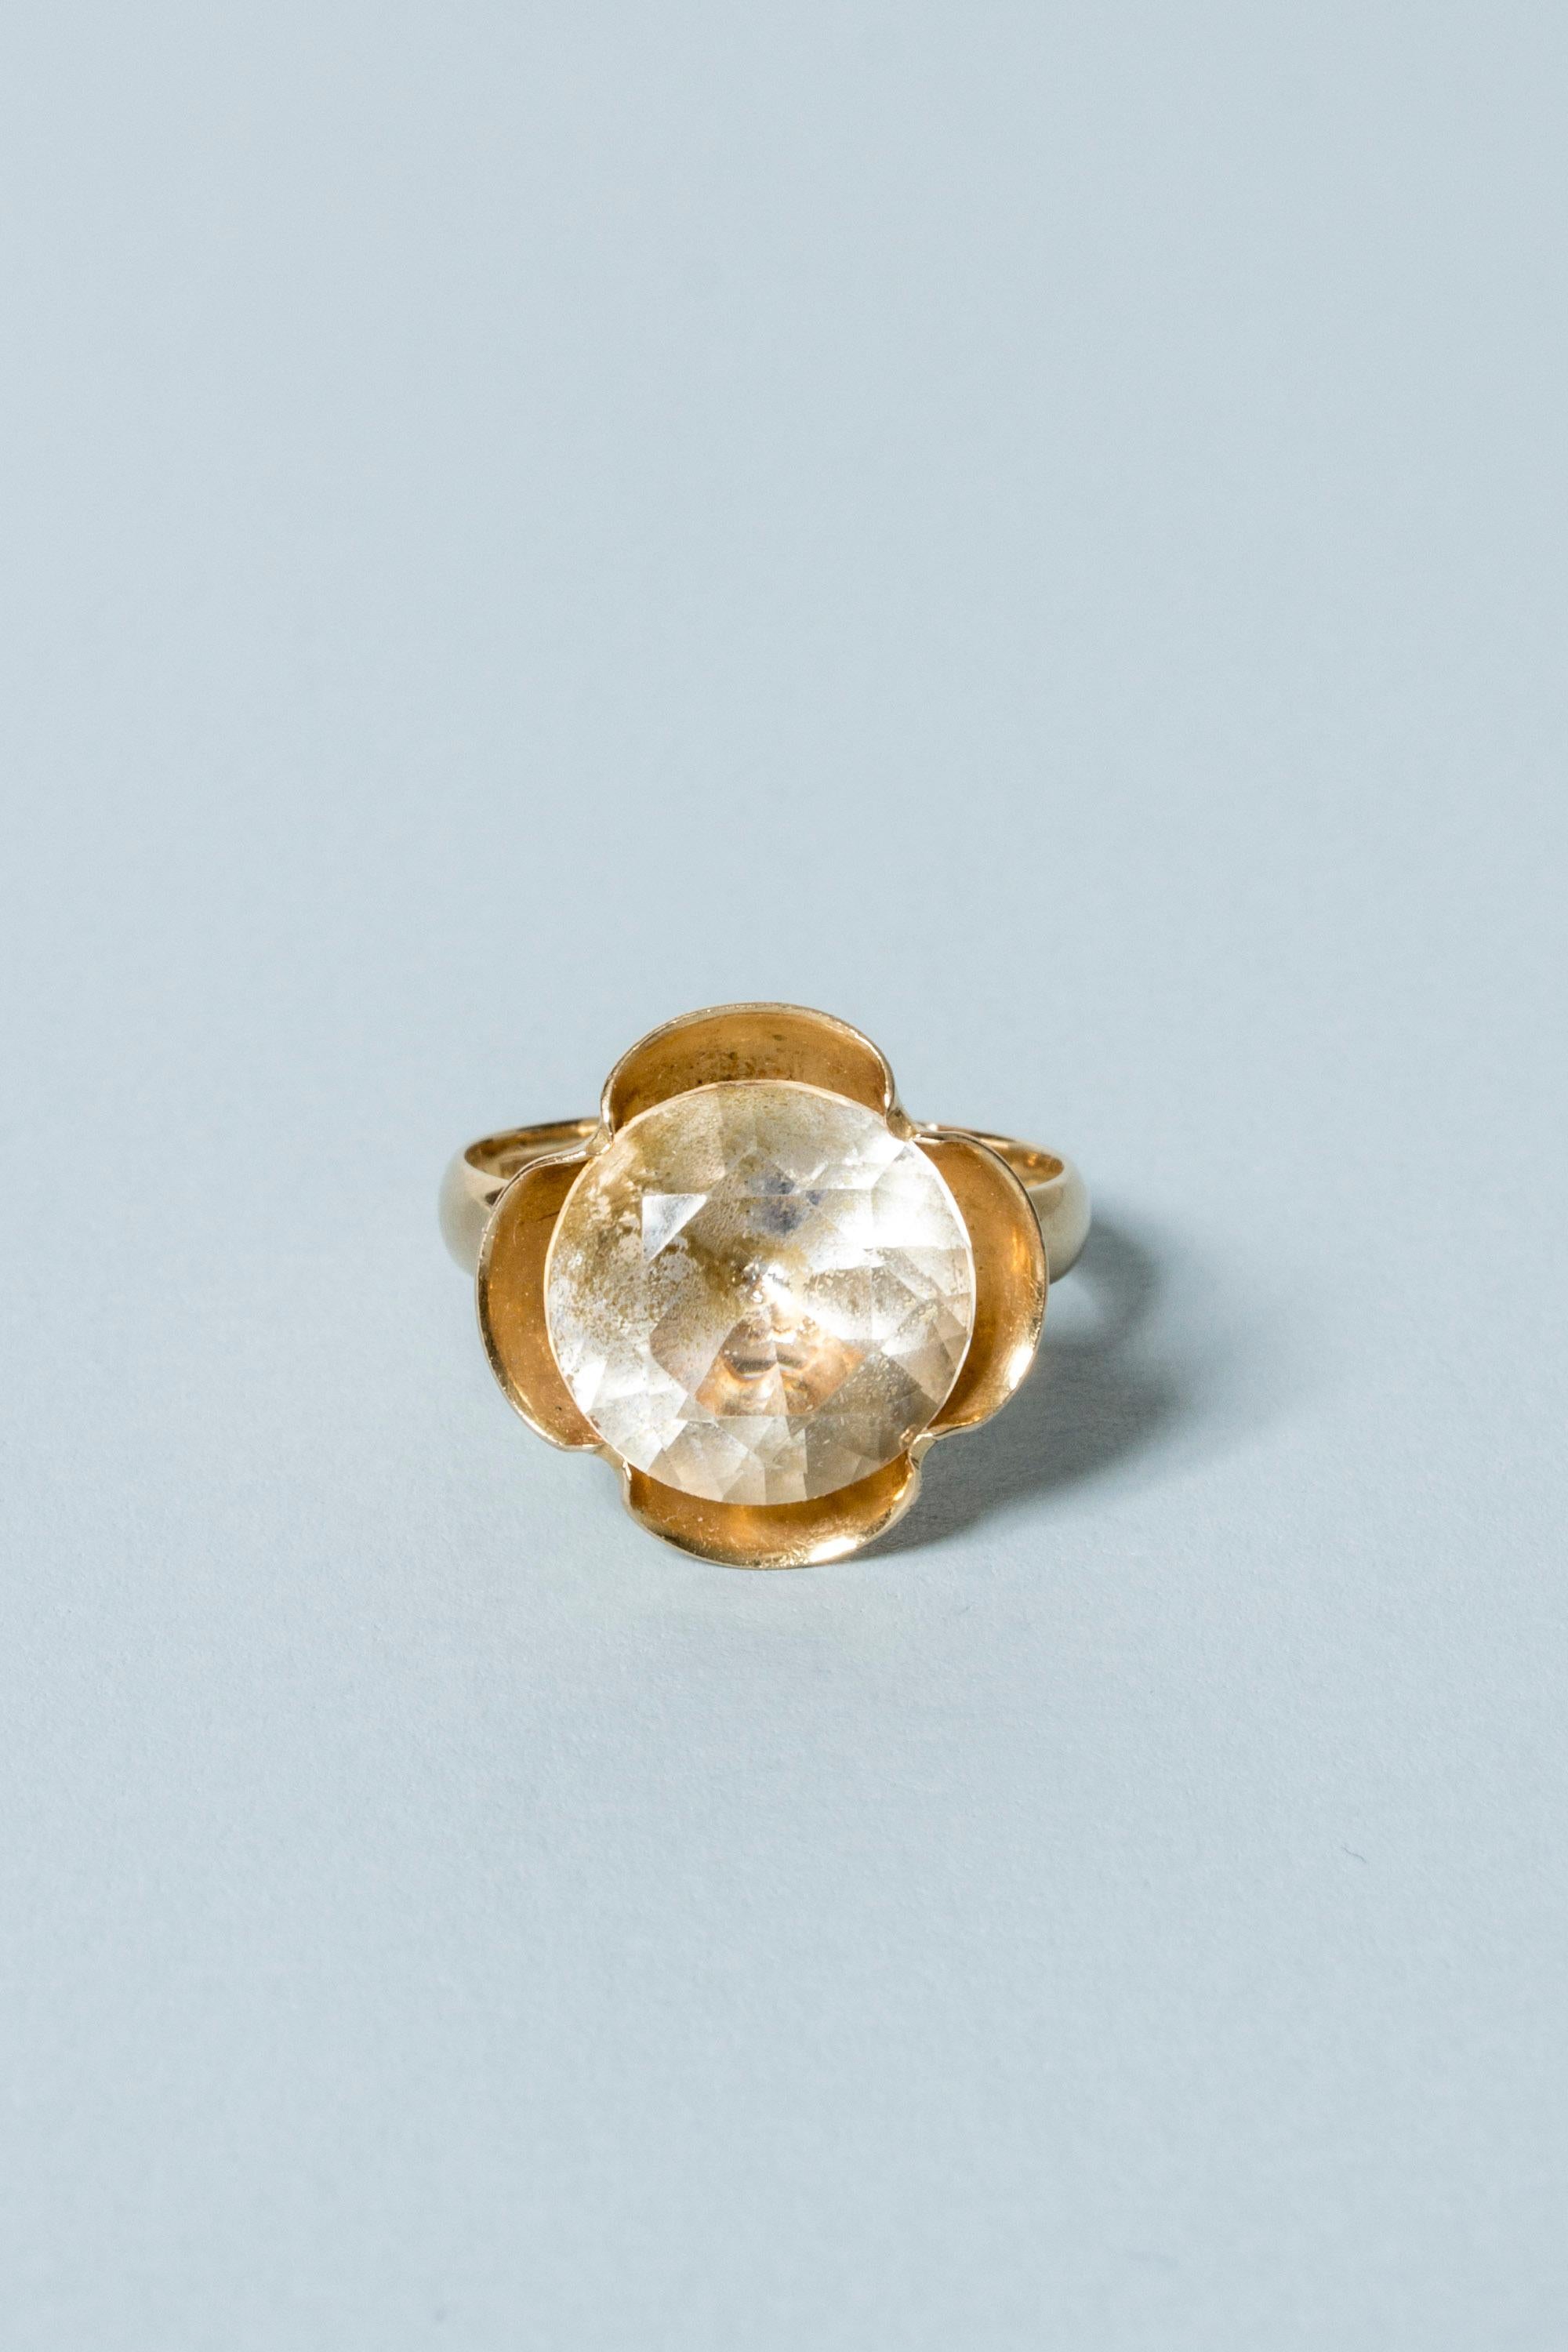 French Cut Modernist Gold and Rock Crystal Ring from Alton, Sweden, 1976